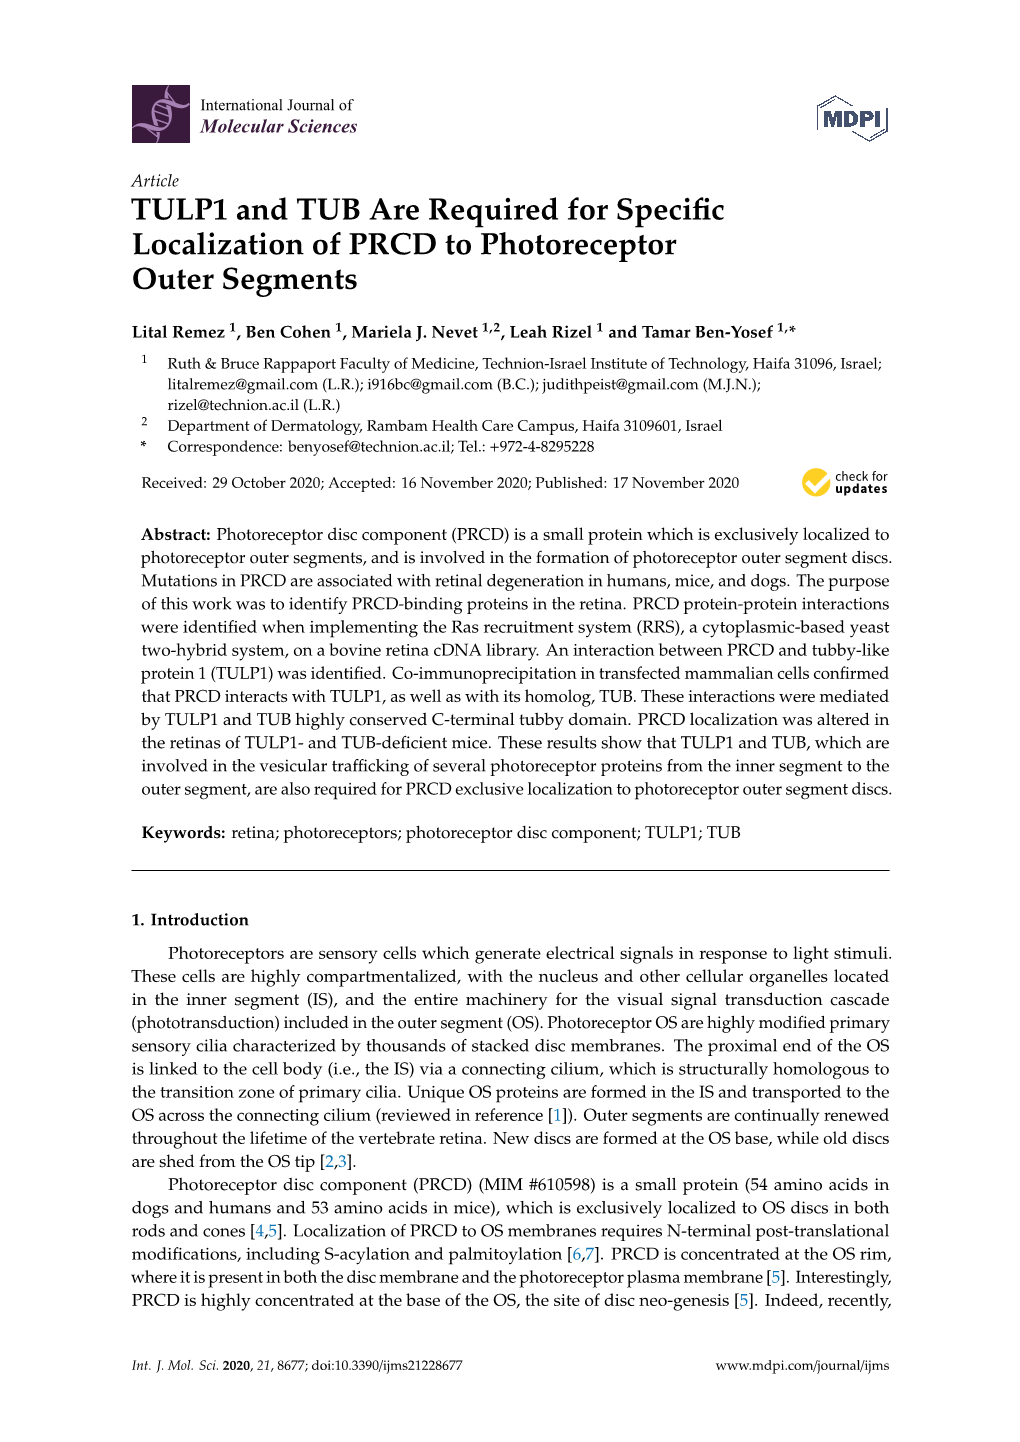 TULP1 and TUB Are Required for Specific Localization of PRCD To